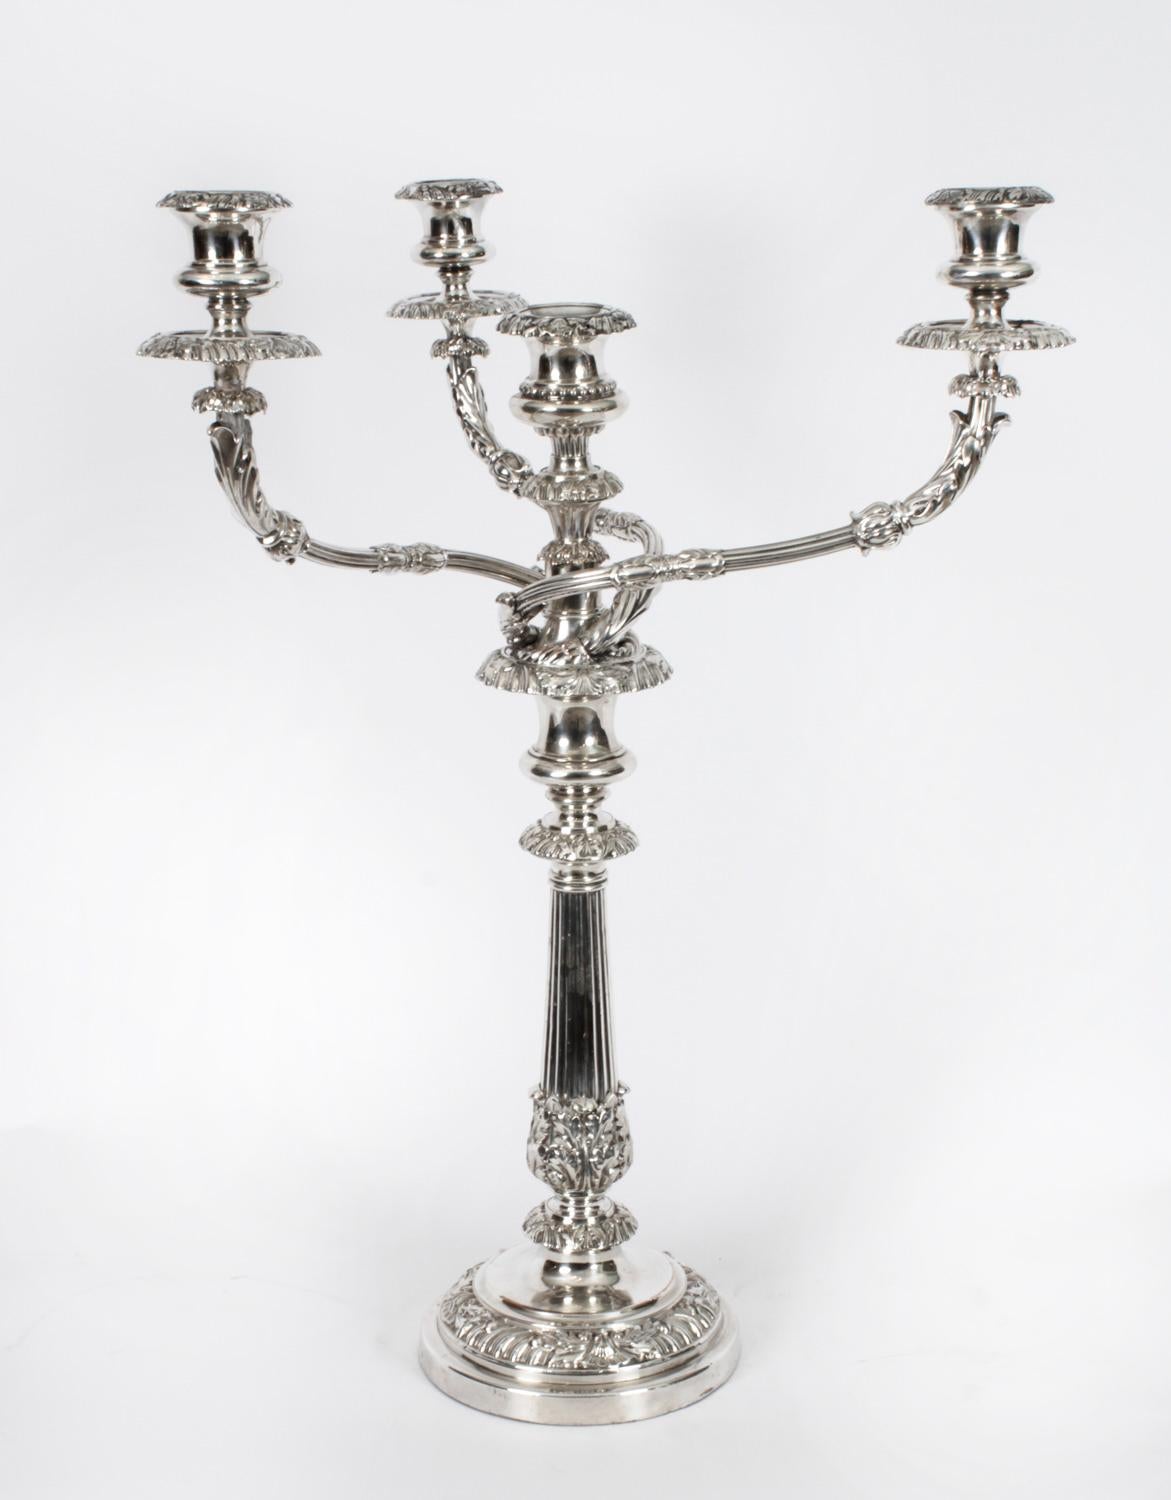 This is a stunning monumental pair of antique English Old Sheffield Plate, silver on copper, four light, three-branch table candelabra, circa 1790 in date, and bearing the sunburst makers marks of the world renowned silversmith Matthew Boulton.
